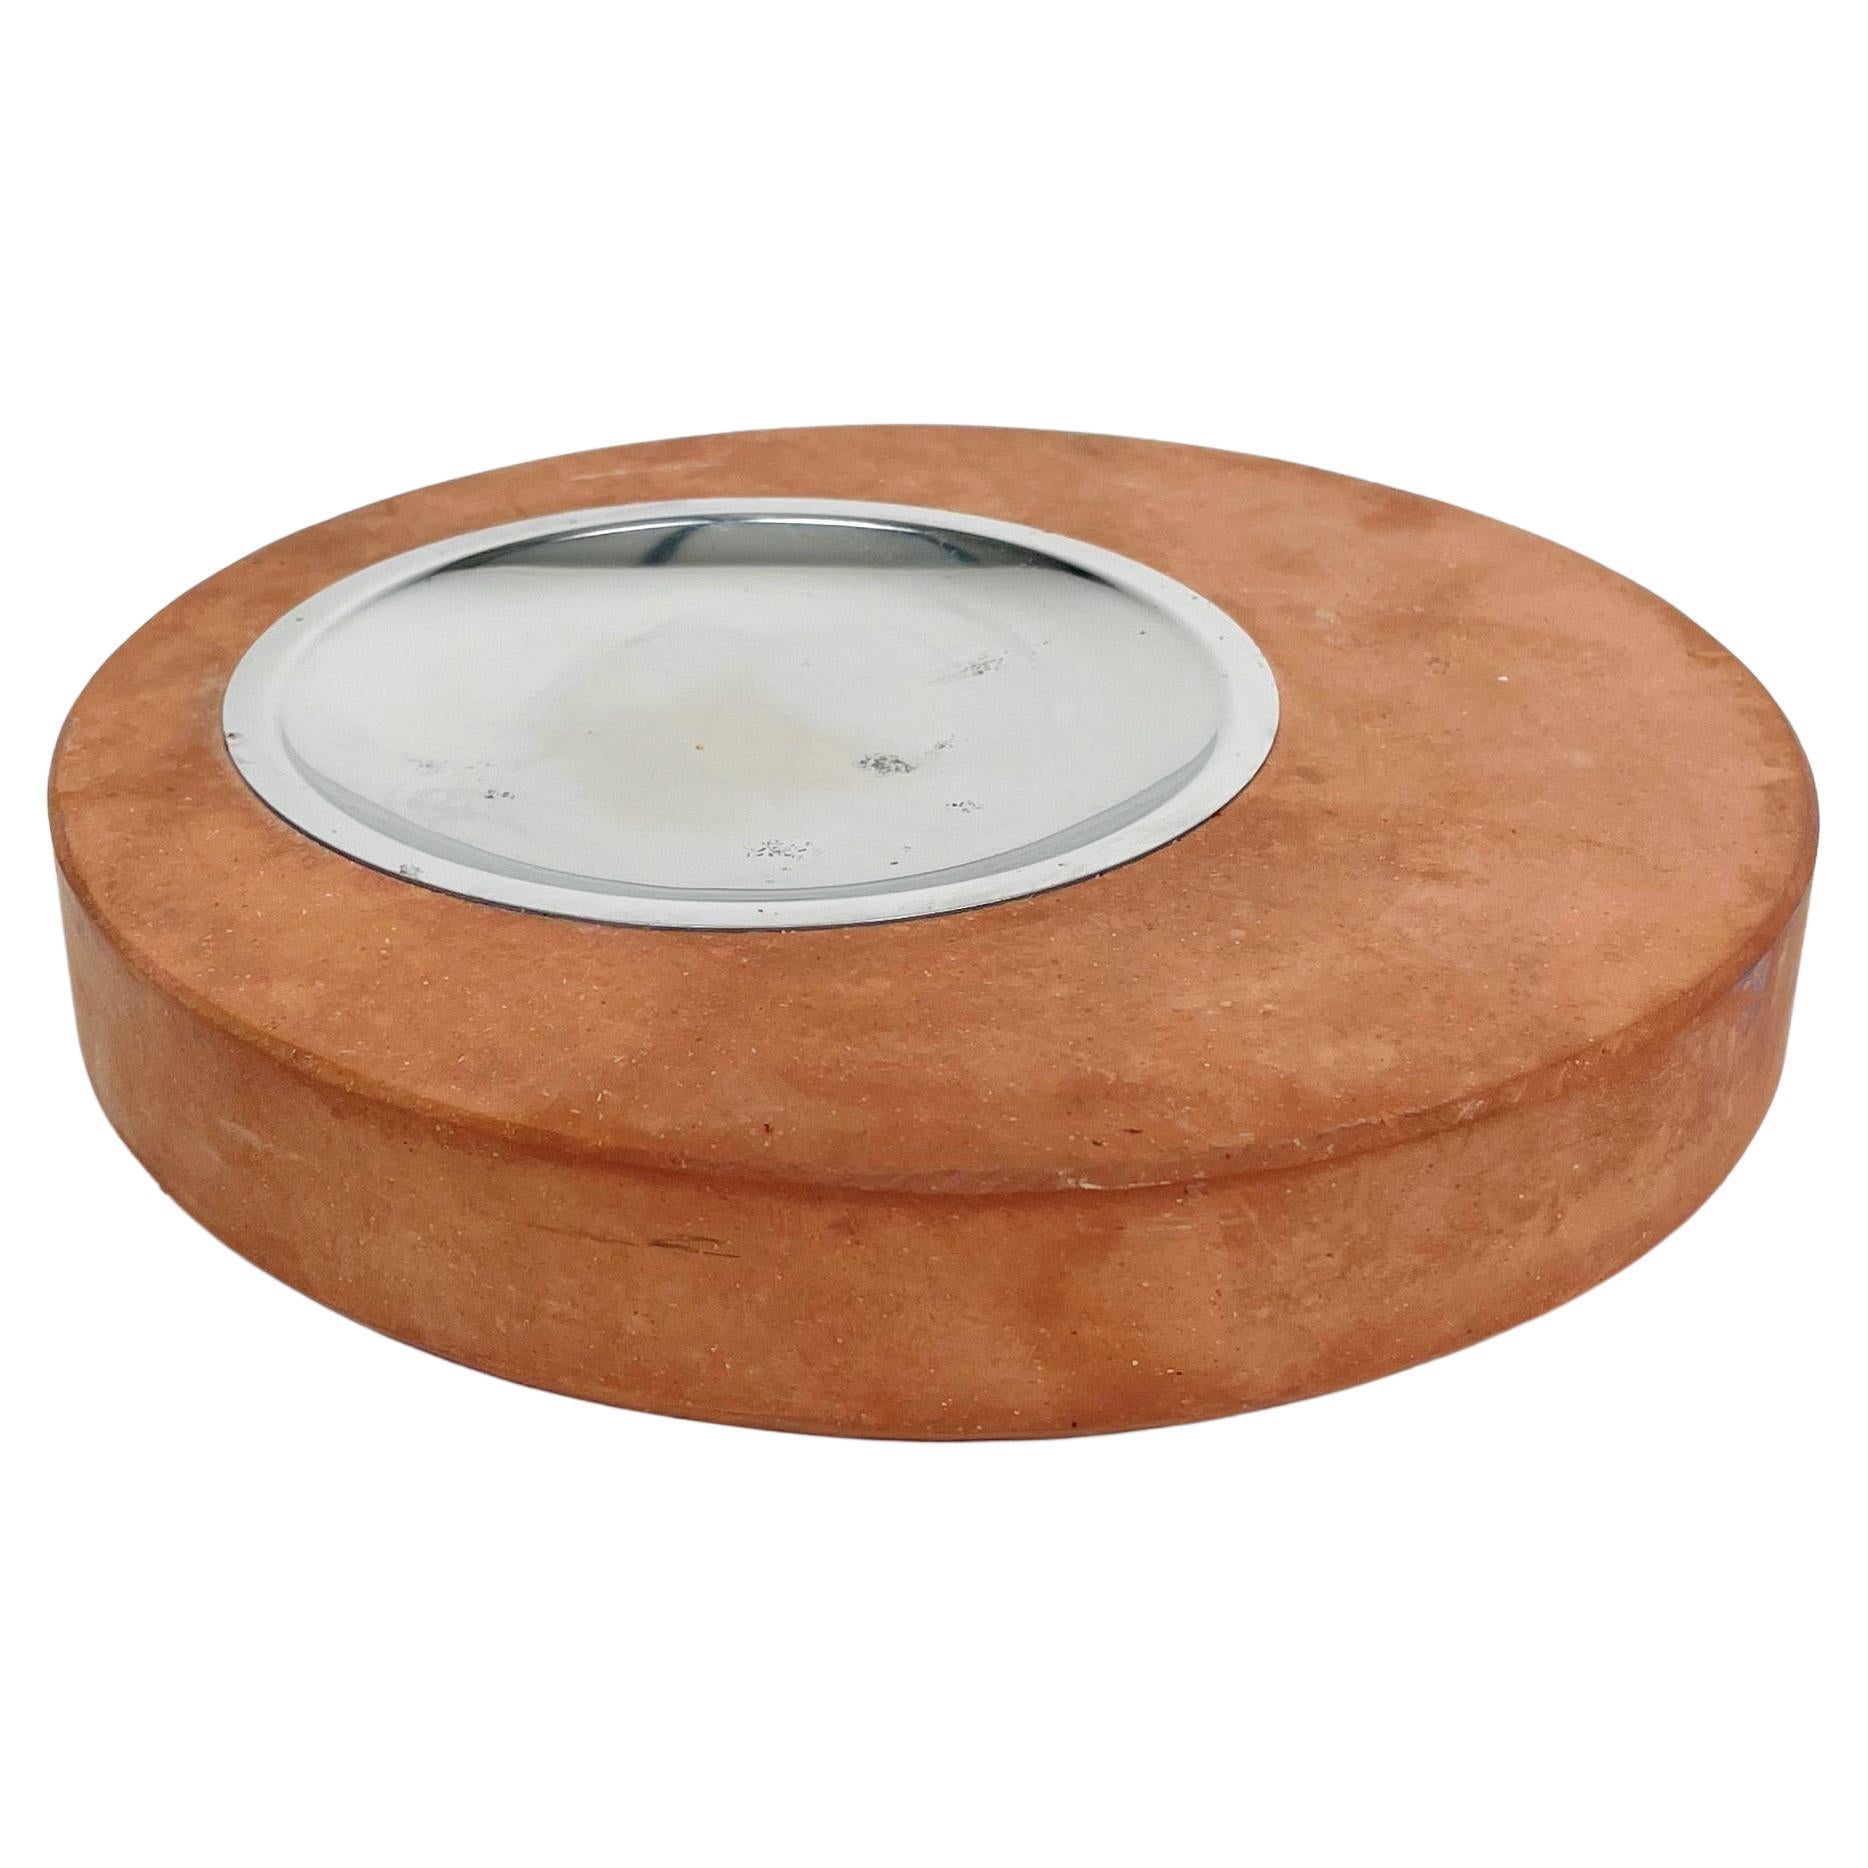 Rare ashtray or vide poche in ceramics terracotta and metal produced by Fratelli Mannelli in the 1970s, Italy. 

The original label is still attached on the back, as shown in the pictures.